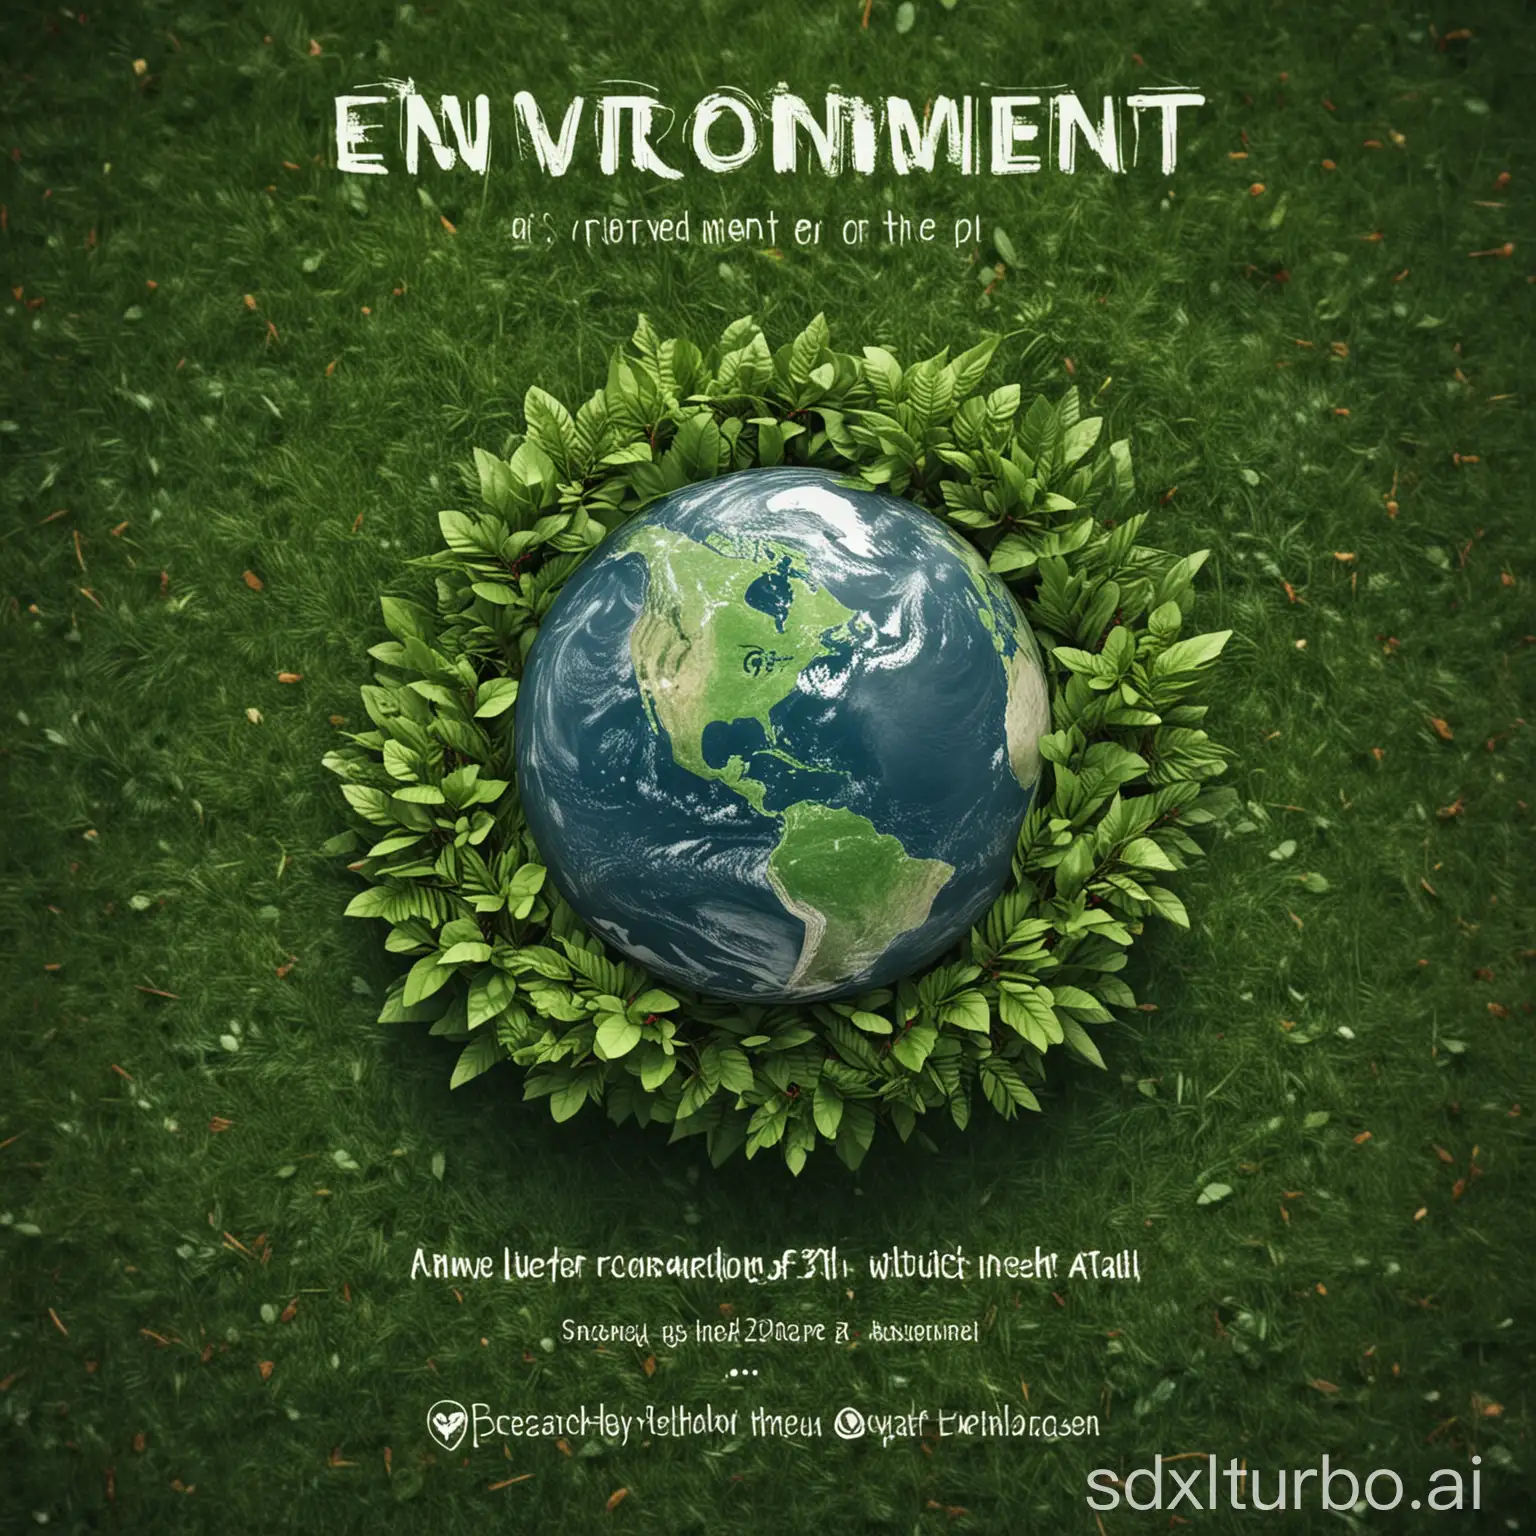 Generate an image for environment day